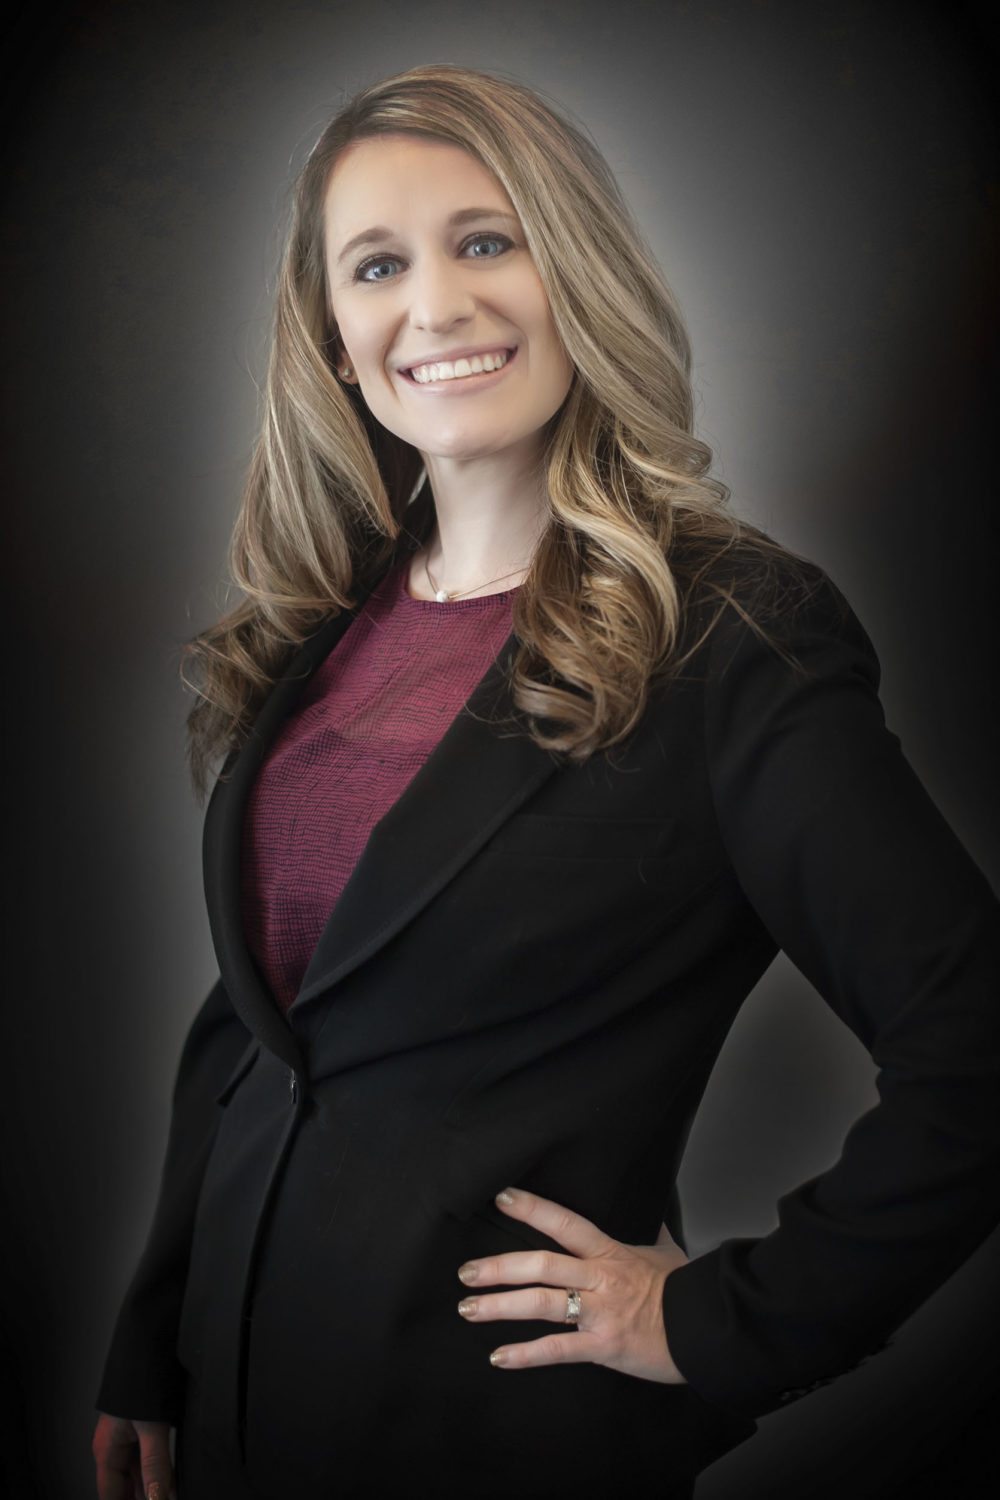 James J. Pisanelli and Todd L. Bice, founding partners of Pisanelli Bice PLLC, announce that Tiffany Kahler has joined the firm as an associate attorney.